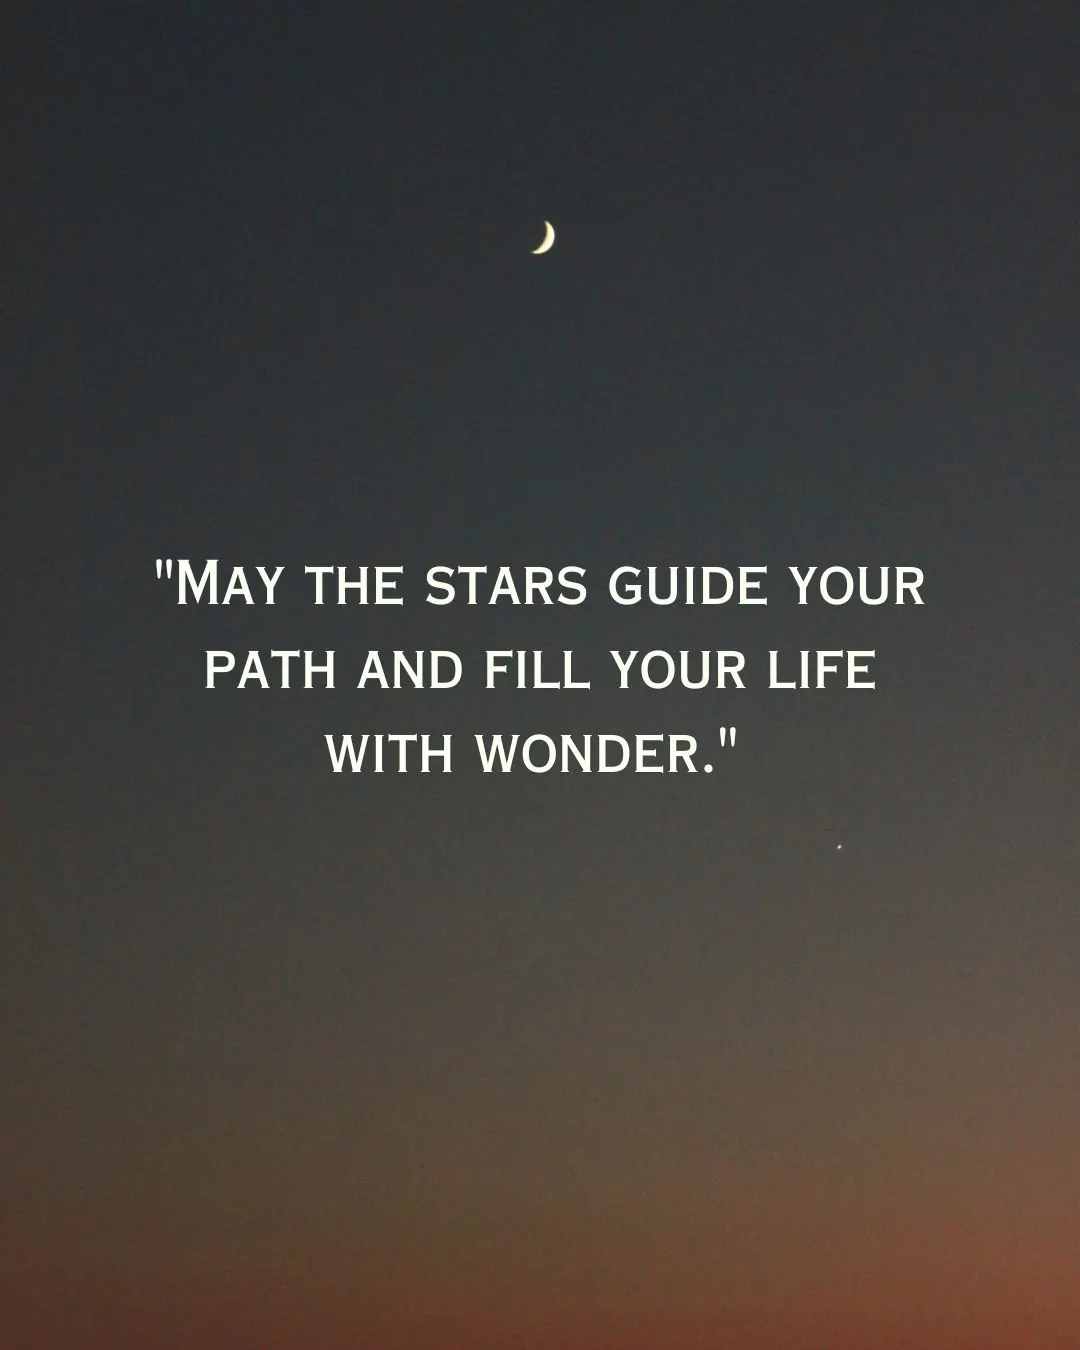 Meaningful Night Sky Quotes for Instagram Image 3